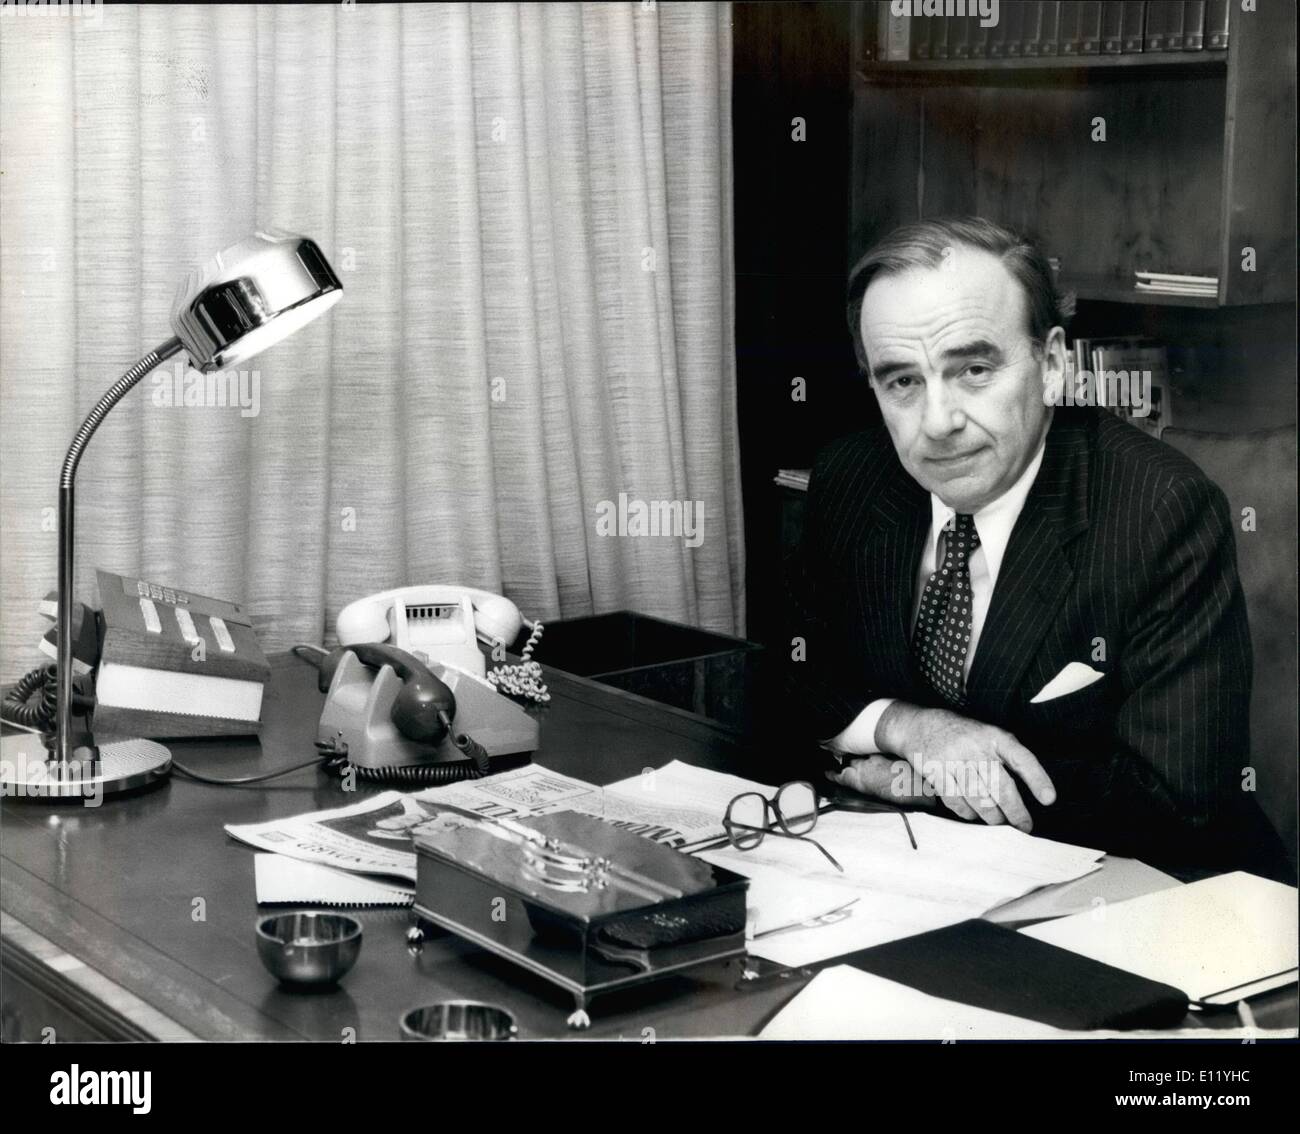 Jan. 01, 1981 - RUPERT MURDOCH - TIMES FRONT RUNNER: Mr. Rupert Murdoch, owner of the Sun and the News of the World, is emerging as the leading contender for the titles of the Time and Sunday Times. The name of the new owners should be known by the end of this week. Photo shows Mr. Rupert Murdoch pictured at his desk in his London office today. Stock Photo